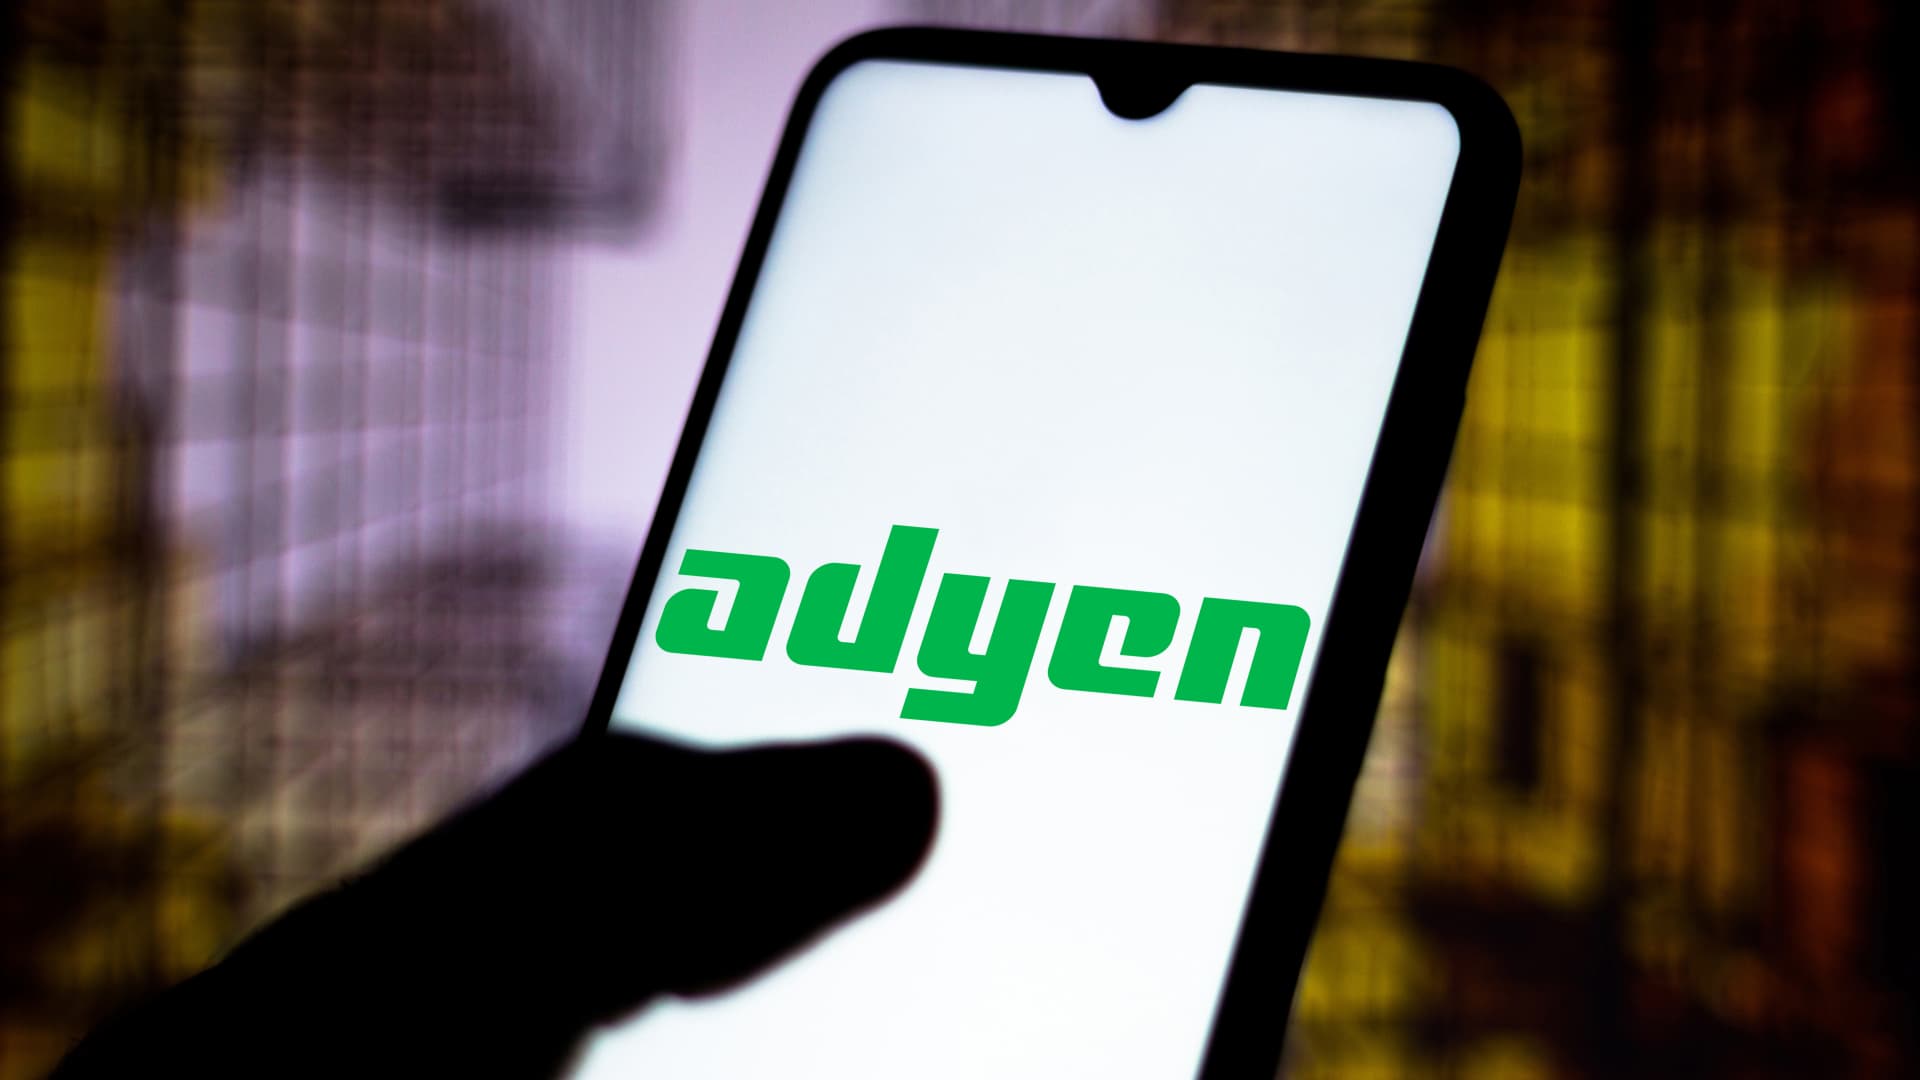 Photo of Europe’s Stripe rival Adyen dives 28% after slowest sales growth on record